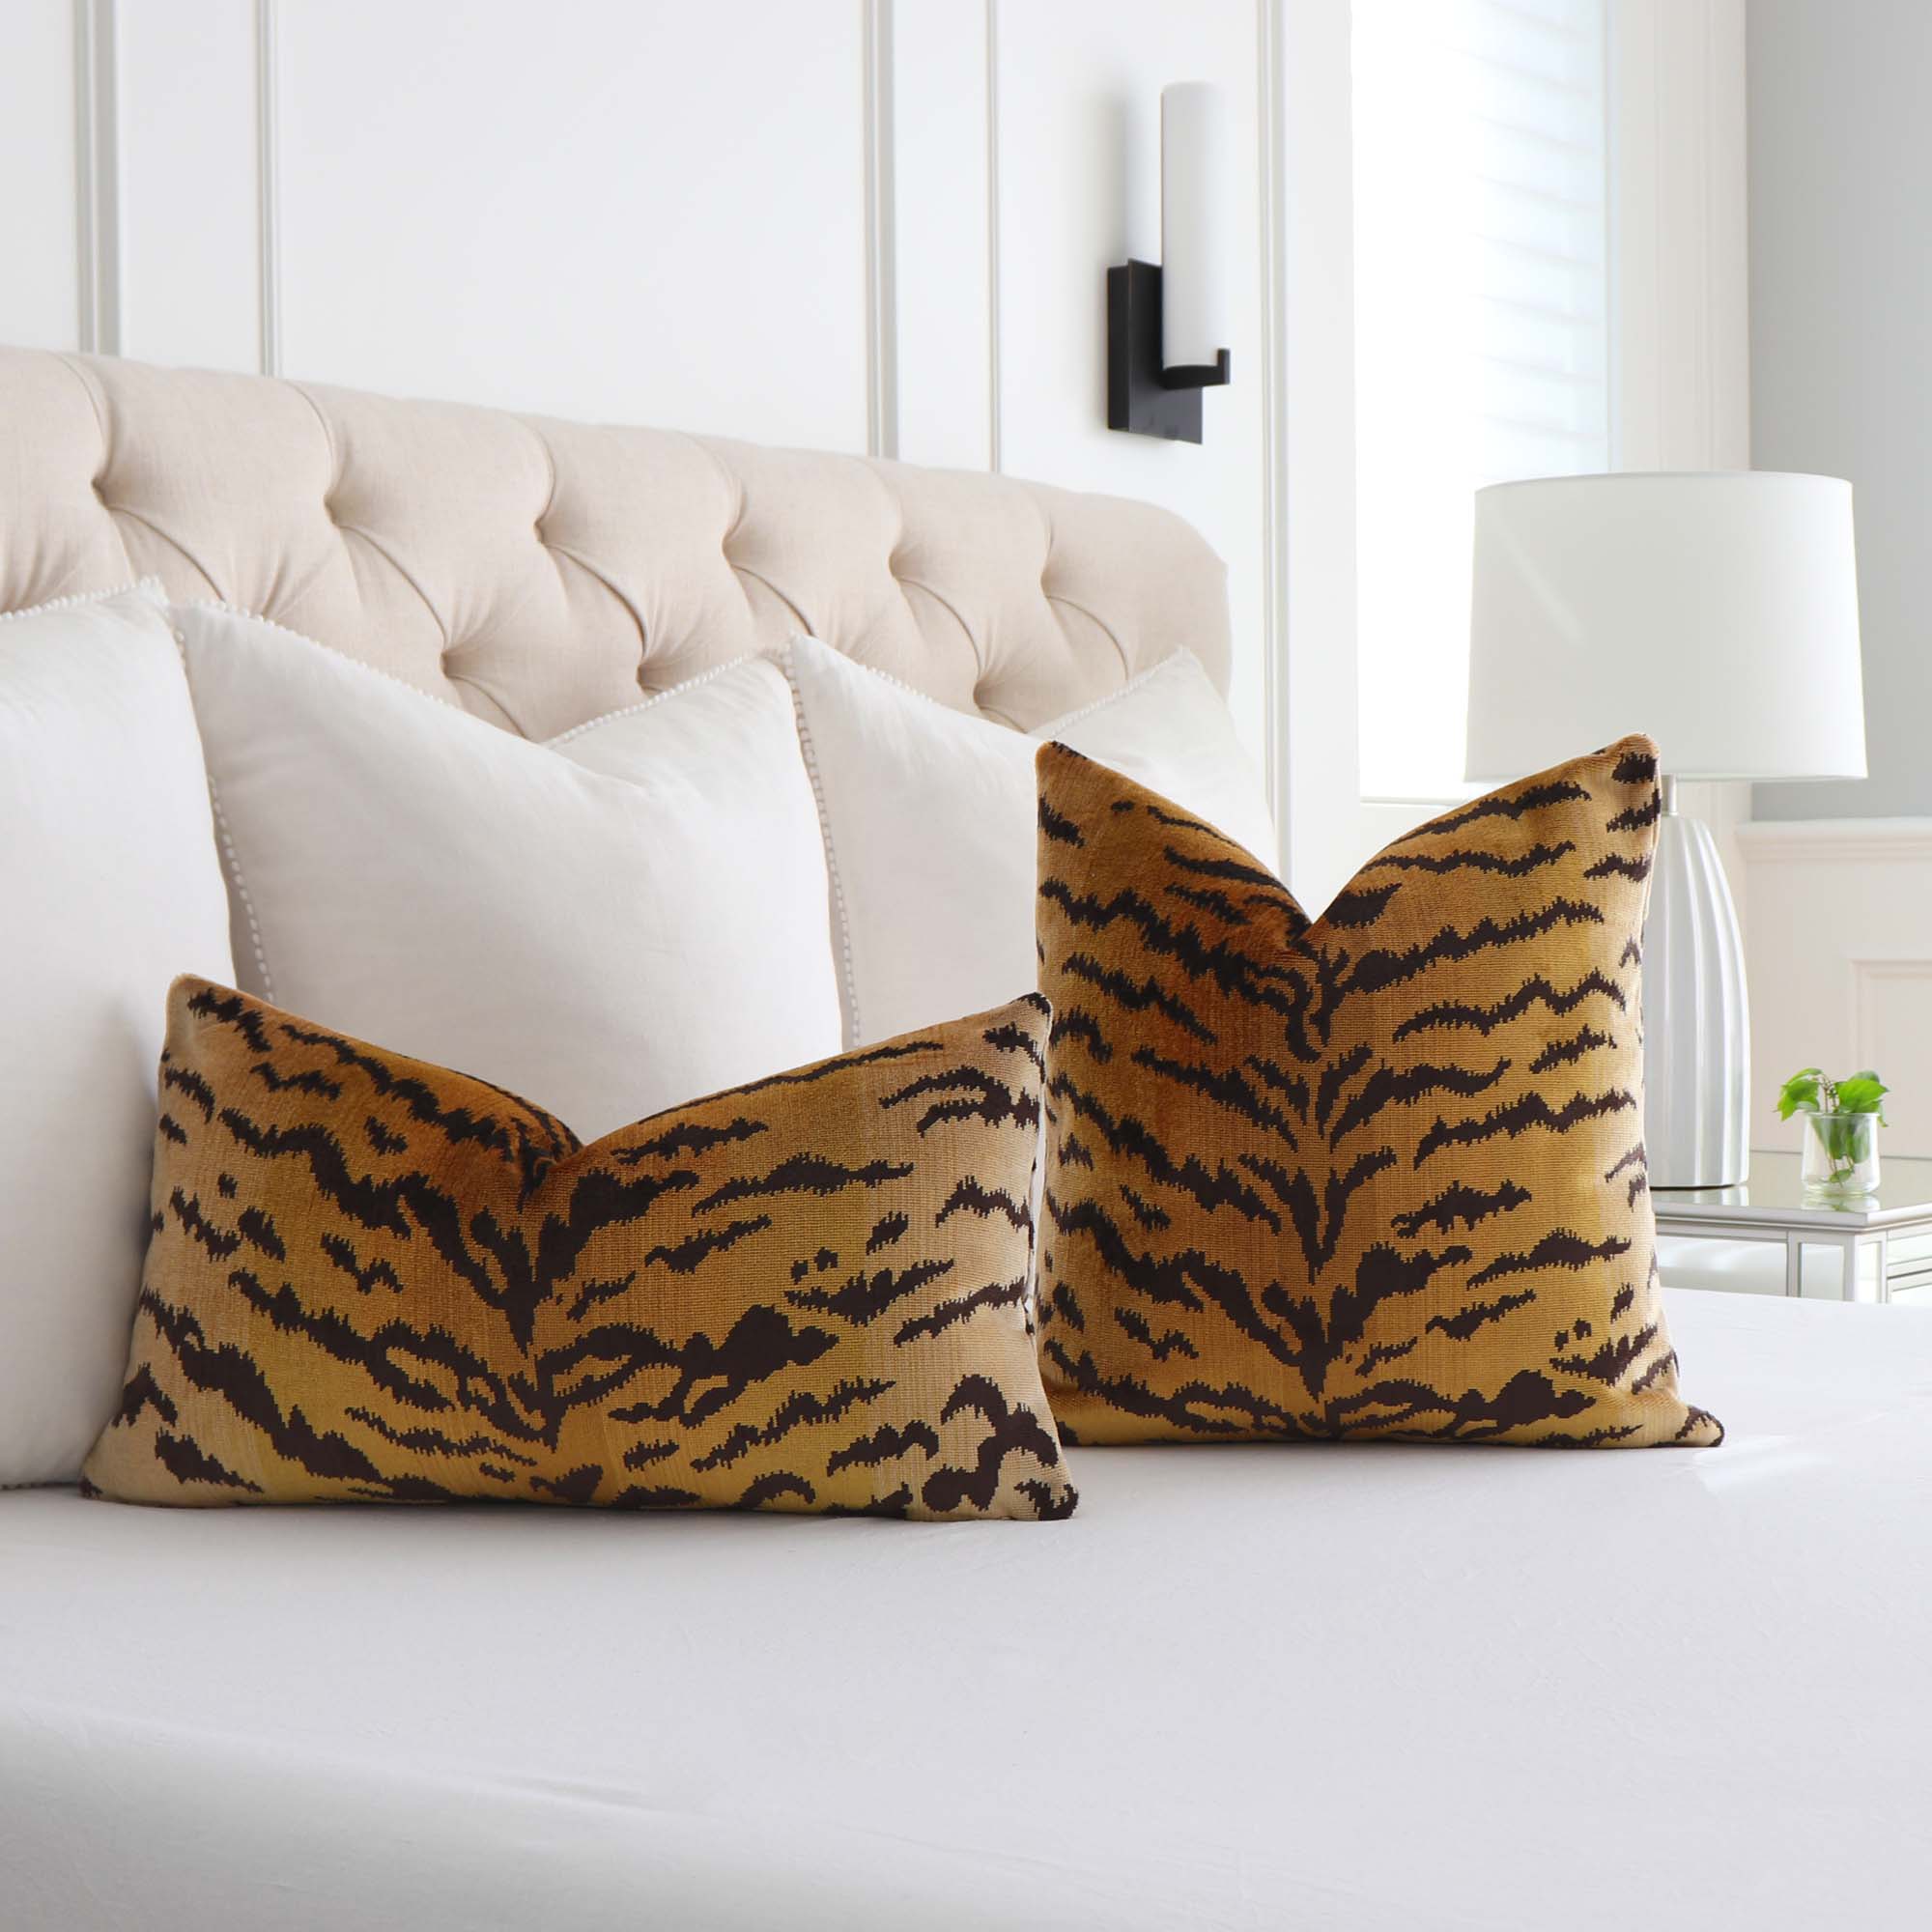 4 Ways to Decorate with Lumbar Pillows - Linen and Ivory